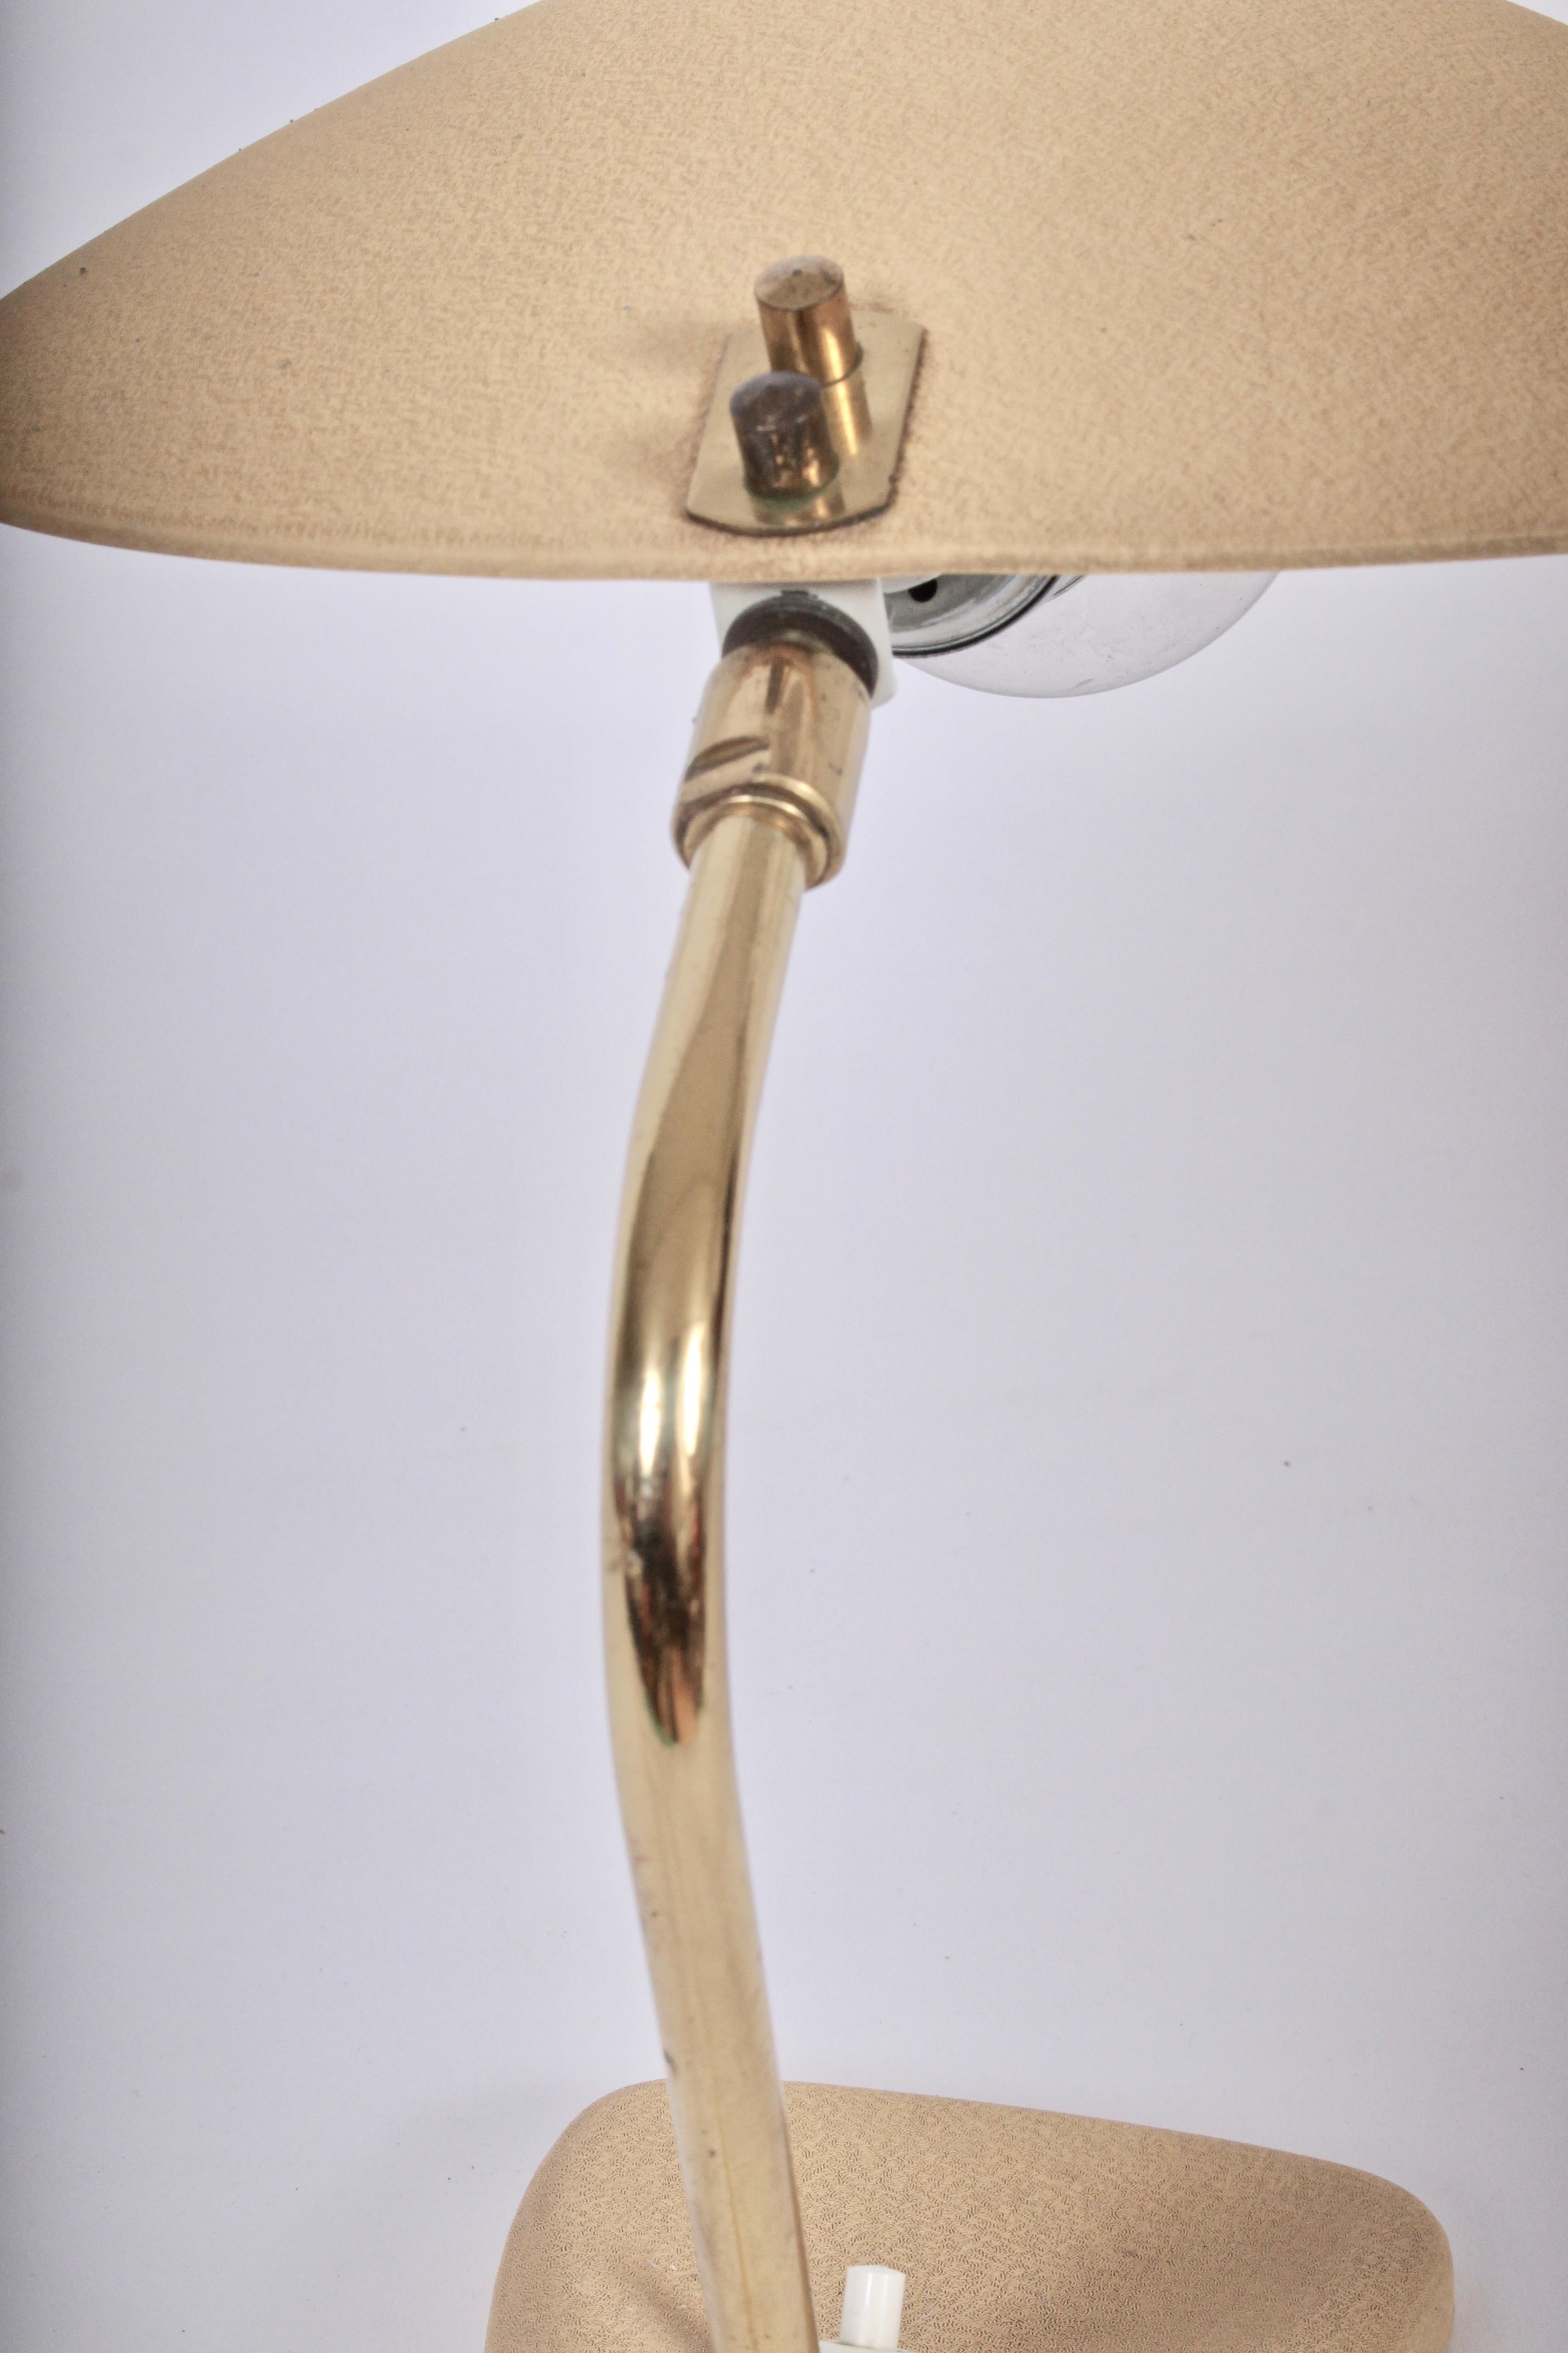 20th Century Stilnovo Style Camel toned Desk Lamp with Saucer Shade, circa 1950s For Sale